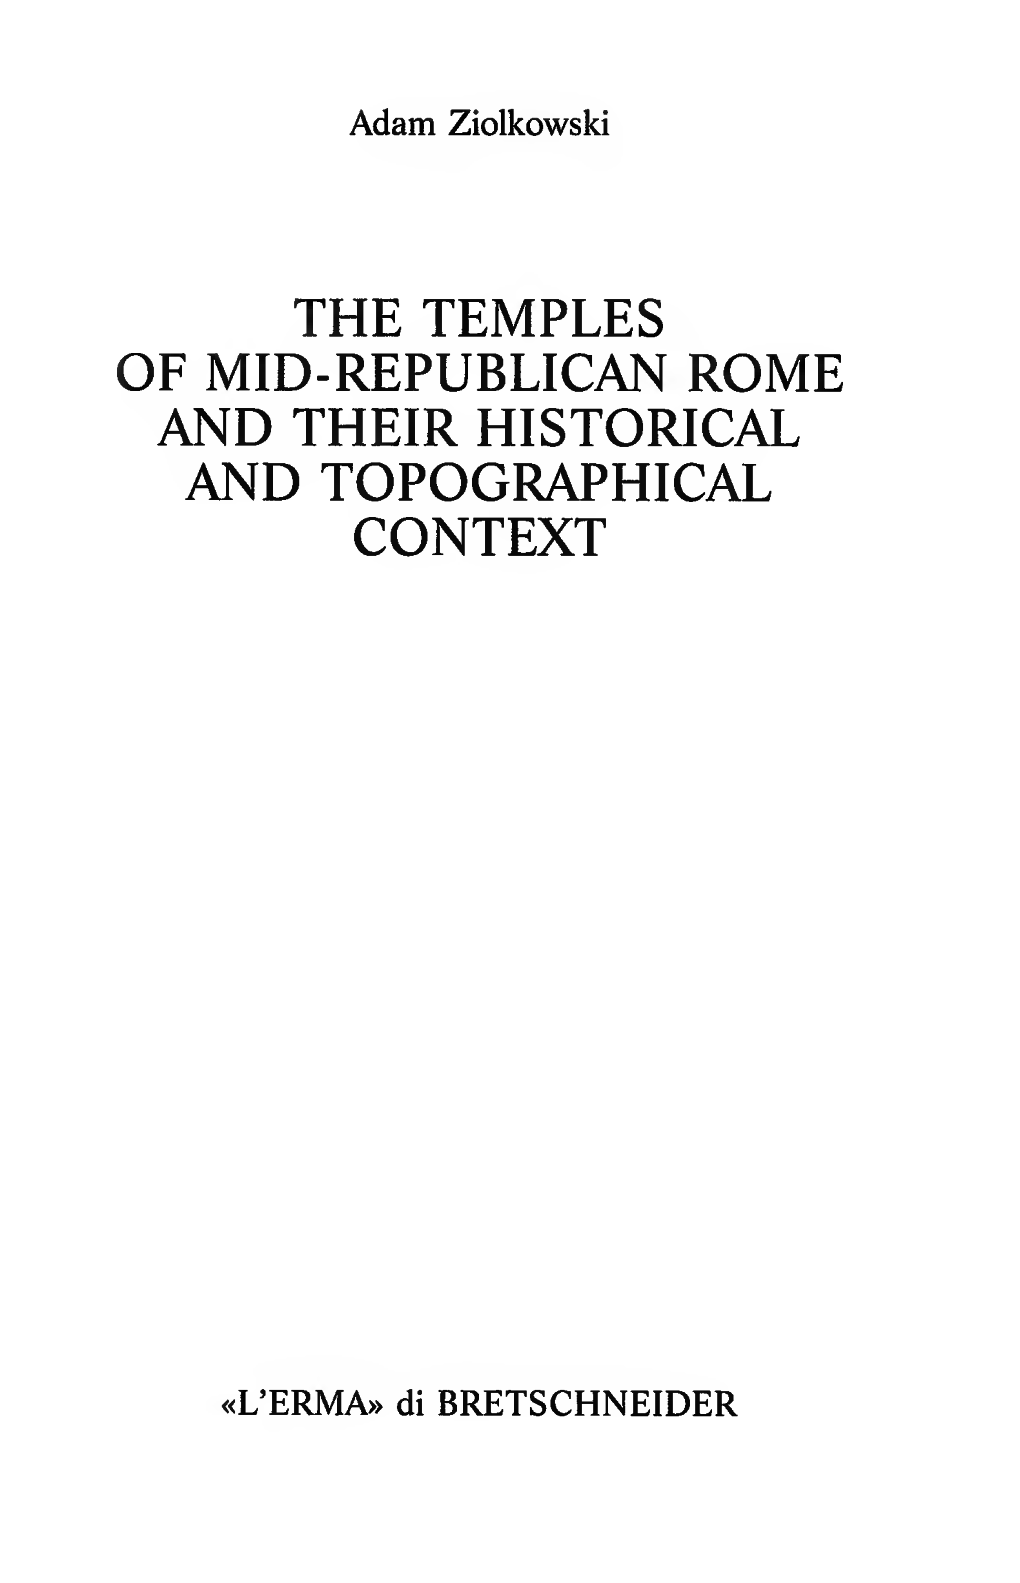 The Temples of Mid-Republican Rome and Their Historical and Topographical Context